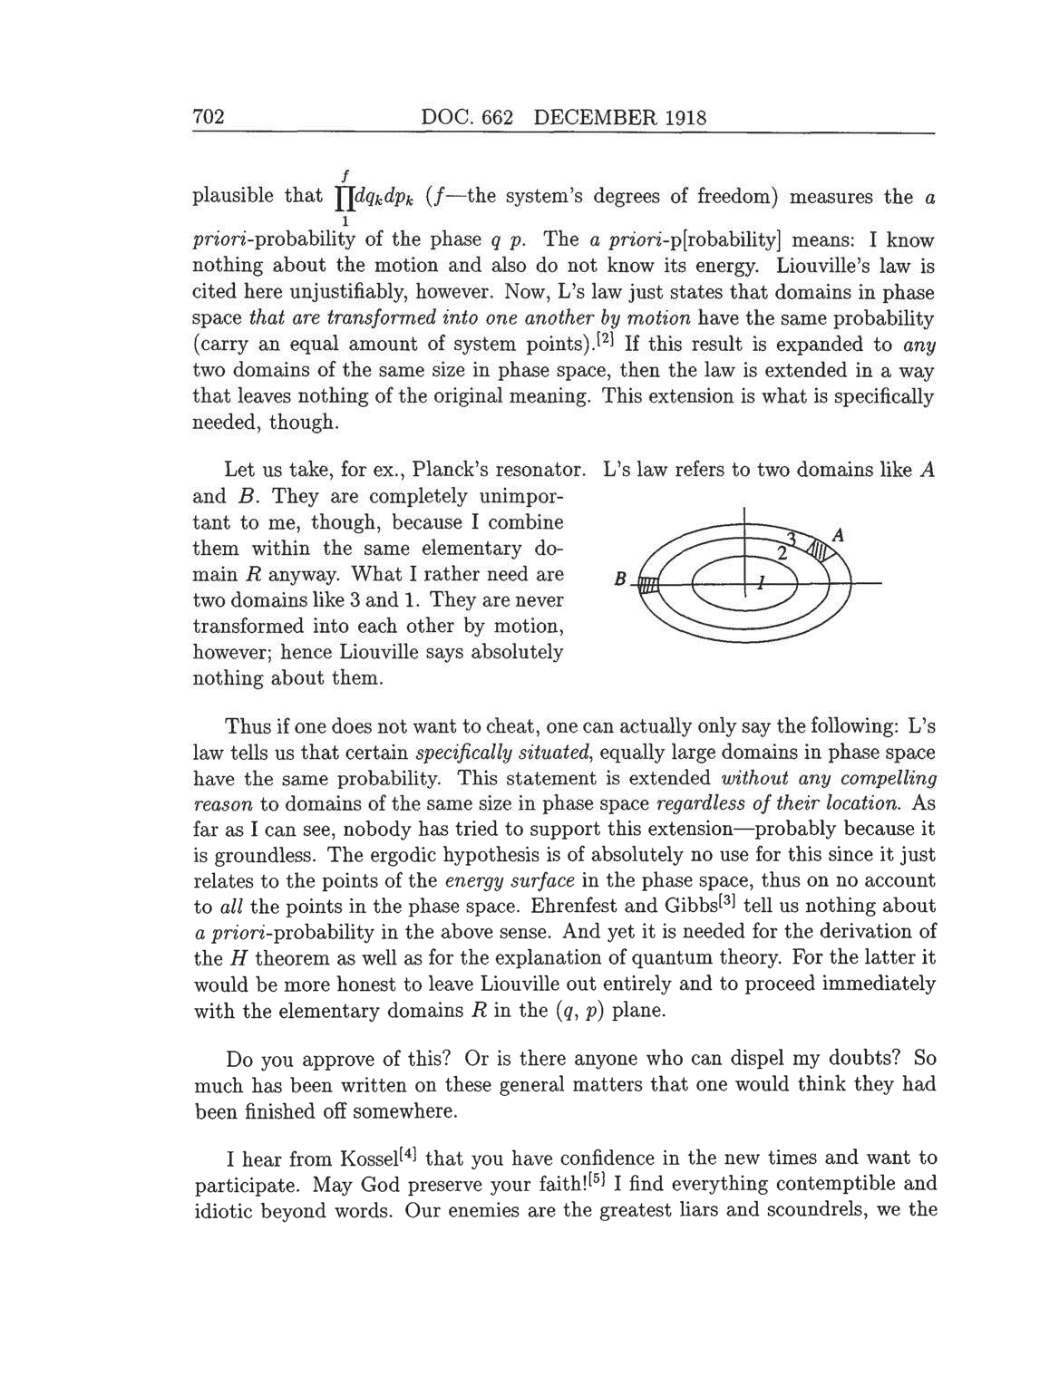 Volume 8: The Berlin Years: Correspondence, 1914-1918 (English translation supplement) page 702